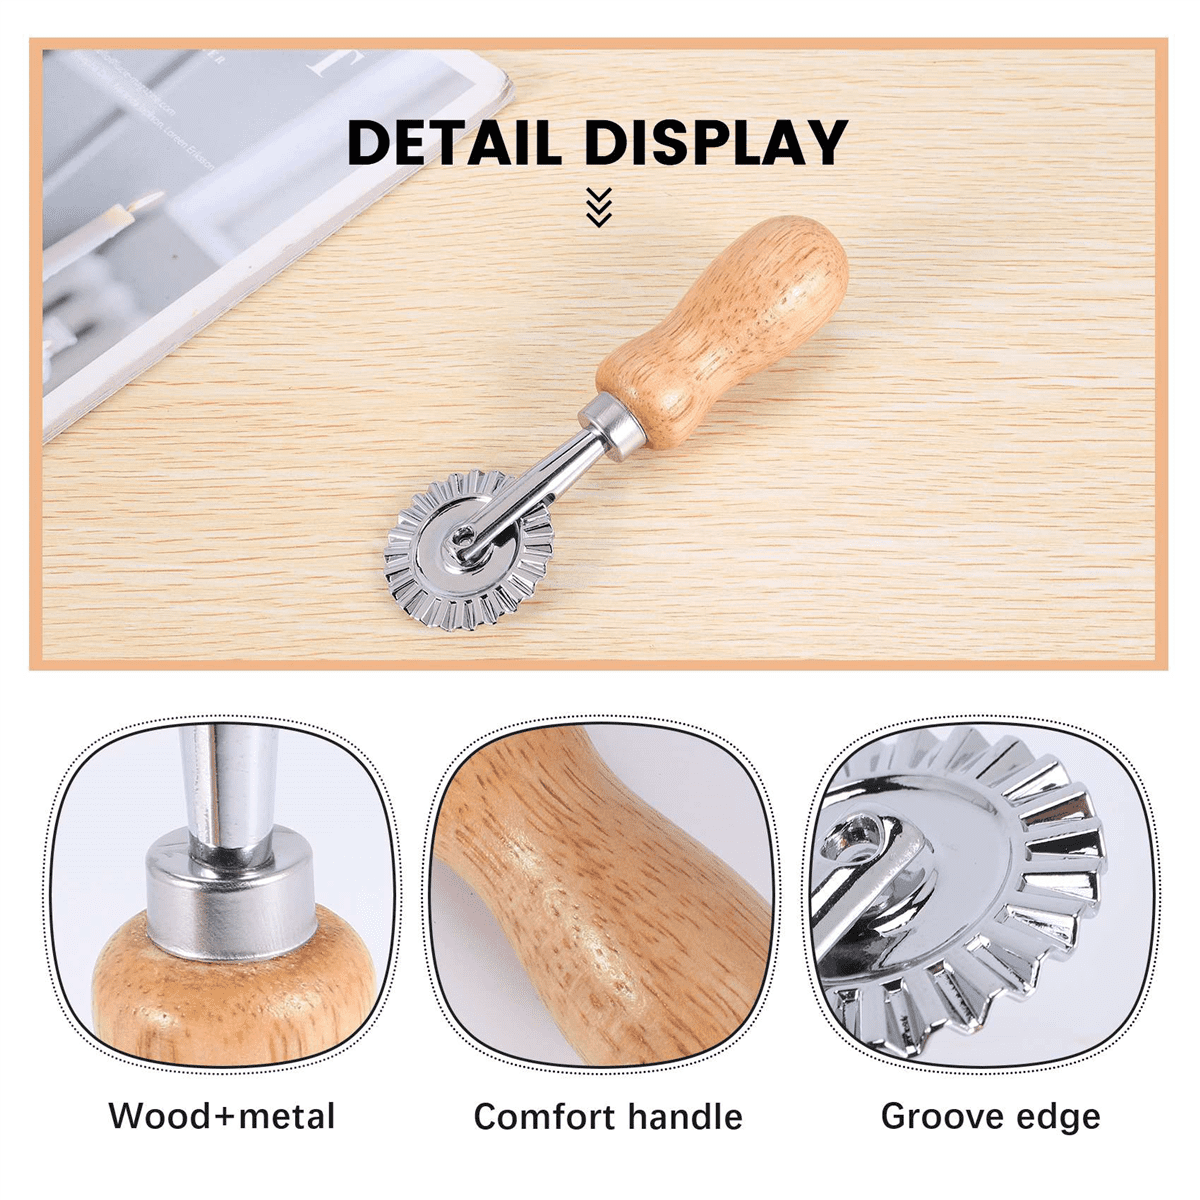 Ravioli Cutter Wheel,Pastry Wheel Cutter with Long Wooden Handle